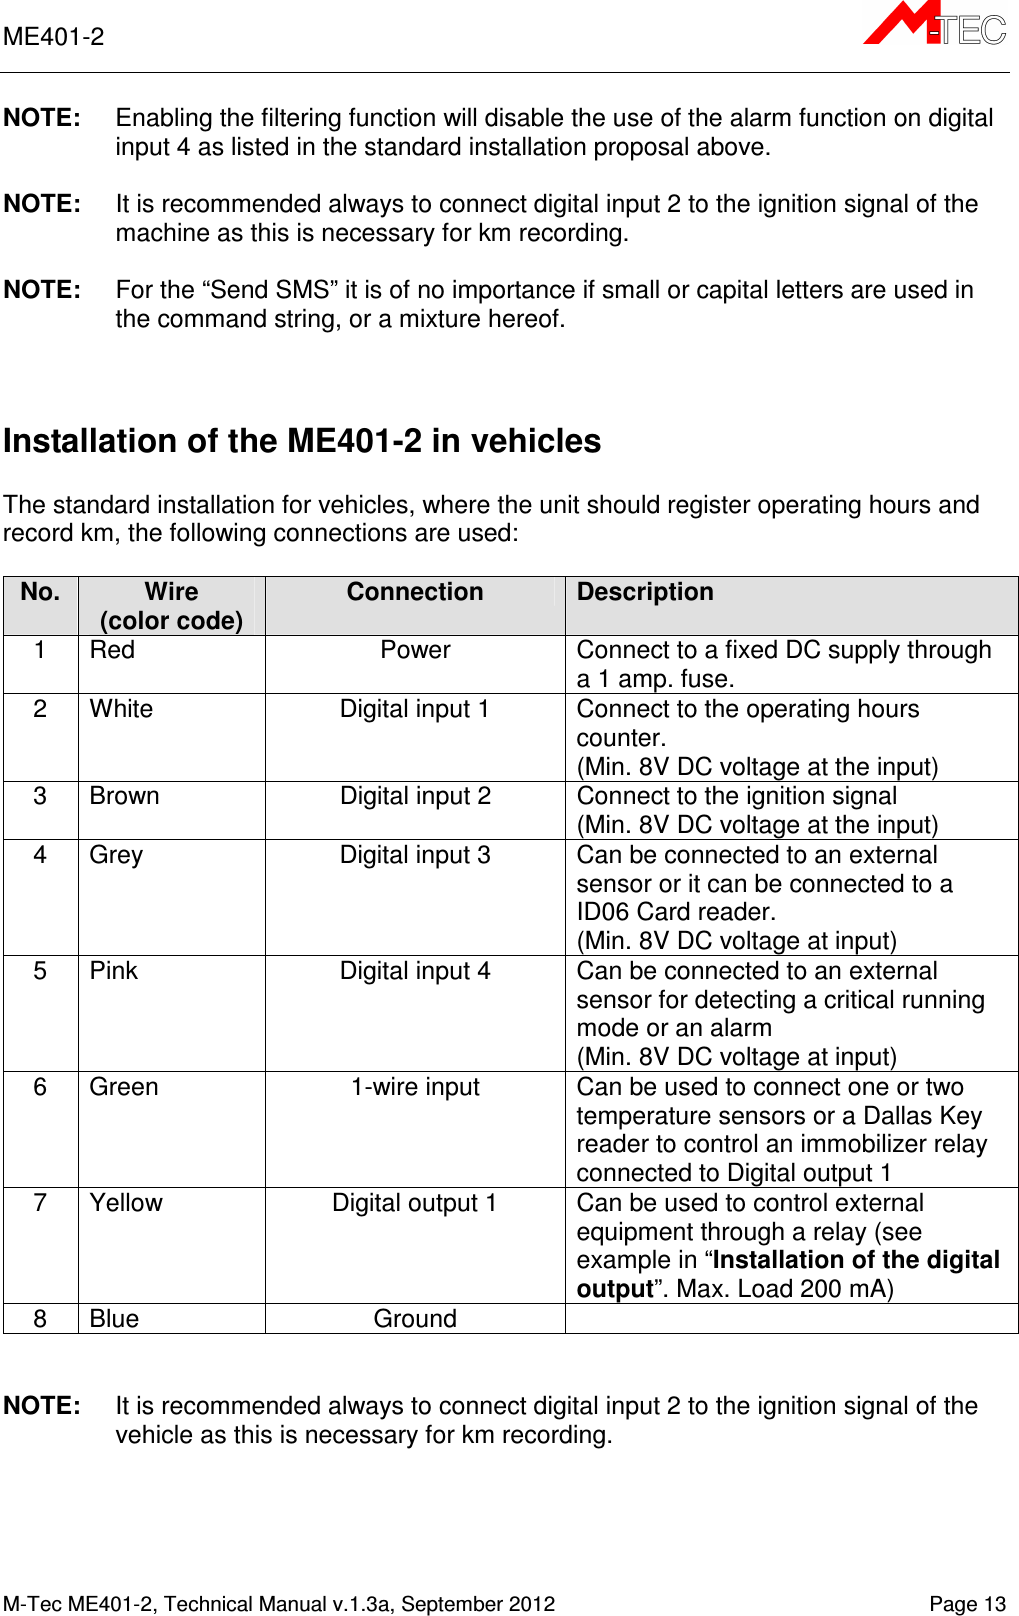 ME401-2       M-Tec ME401-2, Technical Manual v.1.3a, September 2012   Page 13 NOTE:  Enabling the filtering function will disable the use of the alarm function on digital input 4 as listed in the standard installation proposal above.  NOTE:  It is recommended always to connect digital input 2 to the ignition signal of the machine as this is necessary for km recording.  NOTE:  For the “Send SMS” it is of no importance if small or capital letters are used in the command string, or a mixture hereof.   Installation of the ME401-2 in vehicles  The standard installation for vehicles, where the unit should register operating hours and record km, the following connections are used:  No. Wire (color code) Connection Description 1  Red  Power  Connect to a fixed DC supply through a 1 amp. fuse. 2  White  Digital input 1  Connect to the operating hours counter. (Min. 8V DC voltage at the input) 3  Brown  Digital input 2  Connect to the ignition signal (Min. 8V DC voltage at the input) 4  Grey  Digital input 3  Can be connected to an external sensor or it can be connected to a ID06 Card reader. (Min. 8V DC voltage at input) 5  Pink  Digital input 4  Can be connected to an external sensor for detecting a critical running mode or an alarm (Min. 8V DC voltage at input) 6  Green  1-wire input  Can be used to connect one or two temperature sensors or a Dallas Key reader to control an immobilizer relay connected to Digital output 1  7  Yellow  Digital output 1  Can be used to control external equipment through a relay (see example in “Installation of the digital output”. Max. Load 200 mA) 8  Blue  Ground     NOTE:  It is recommended always to connect digital input 2 to the ignition signal of the vehicle as this is necessary for km recording.   